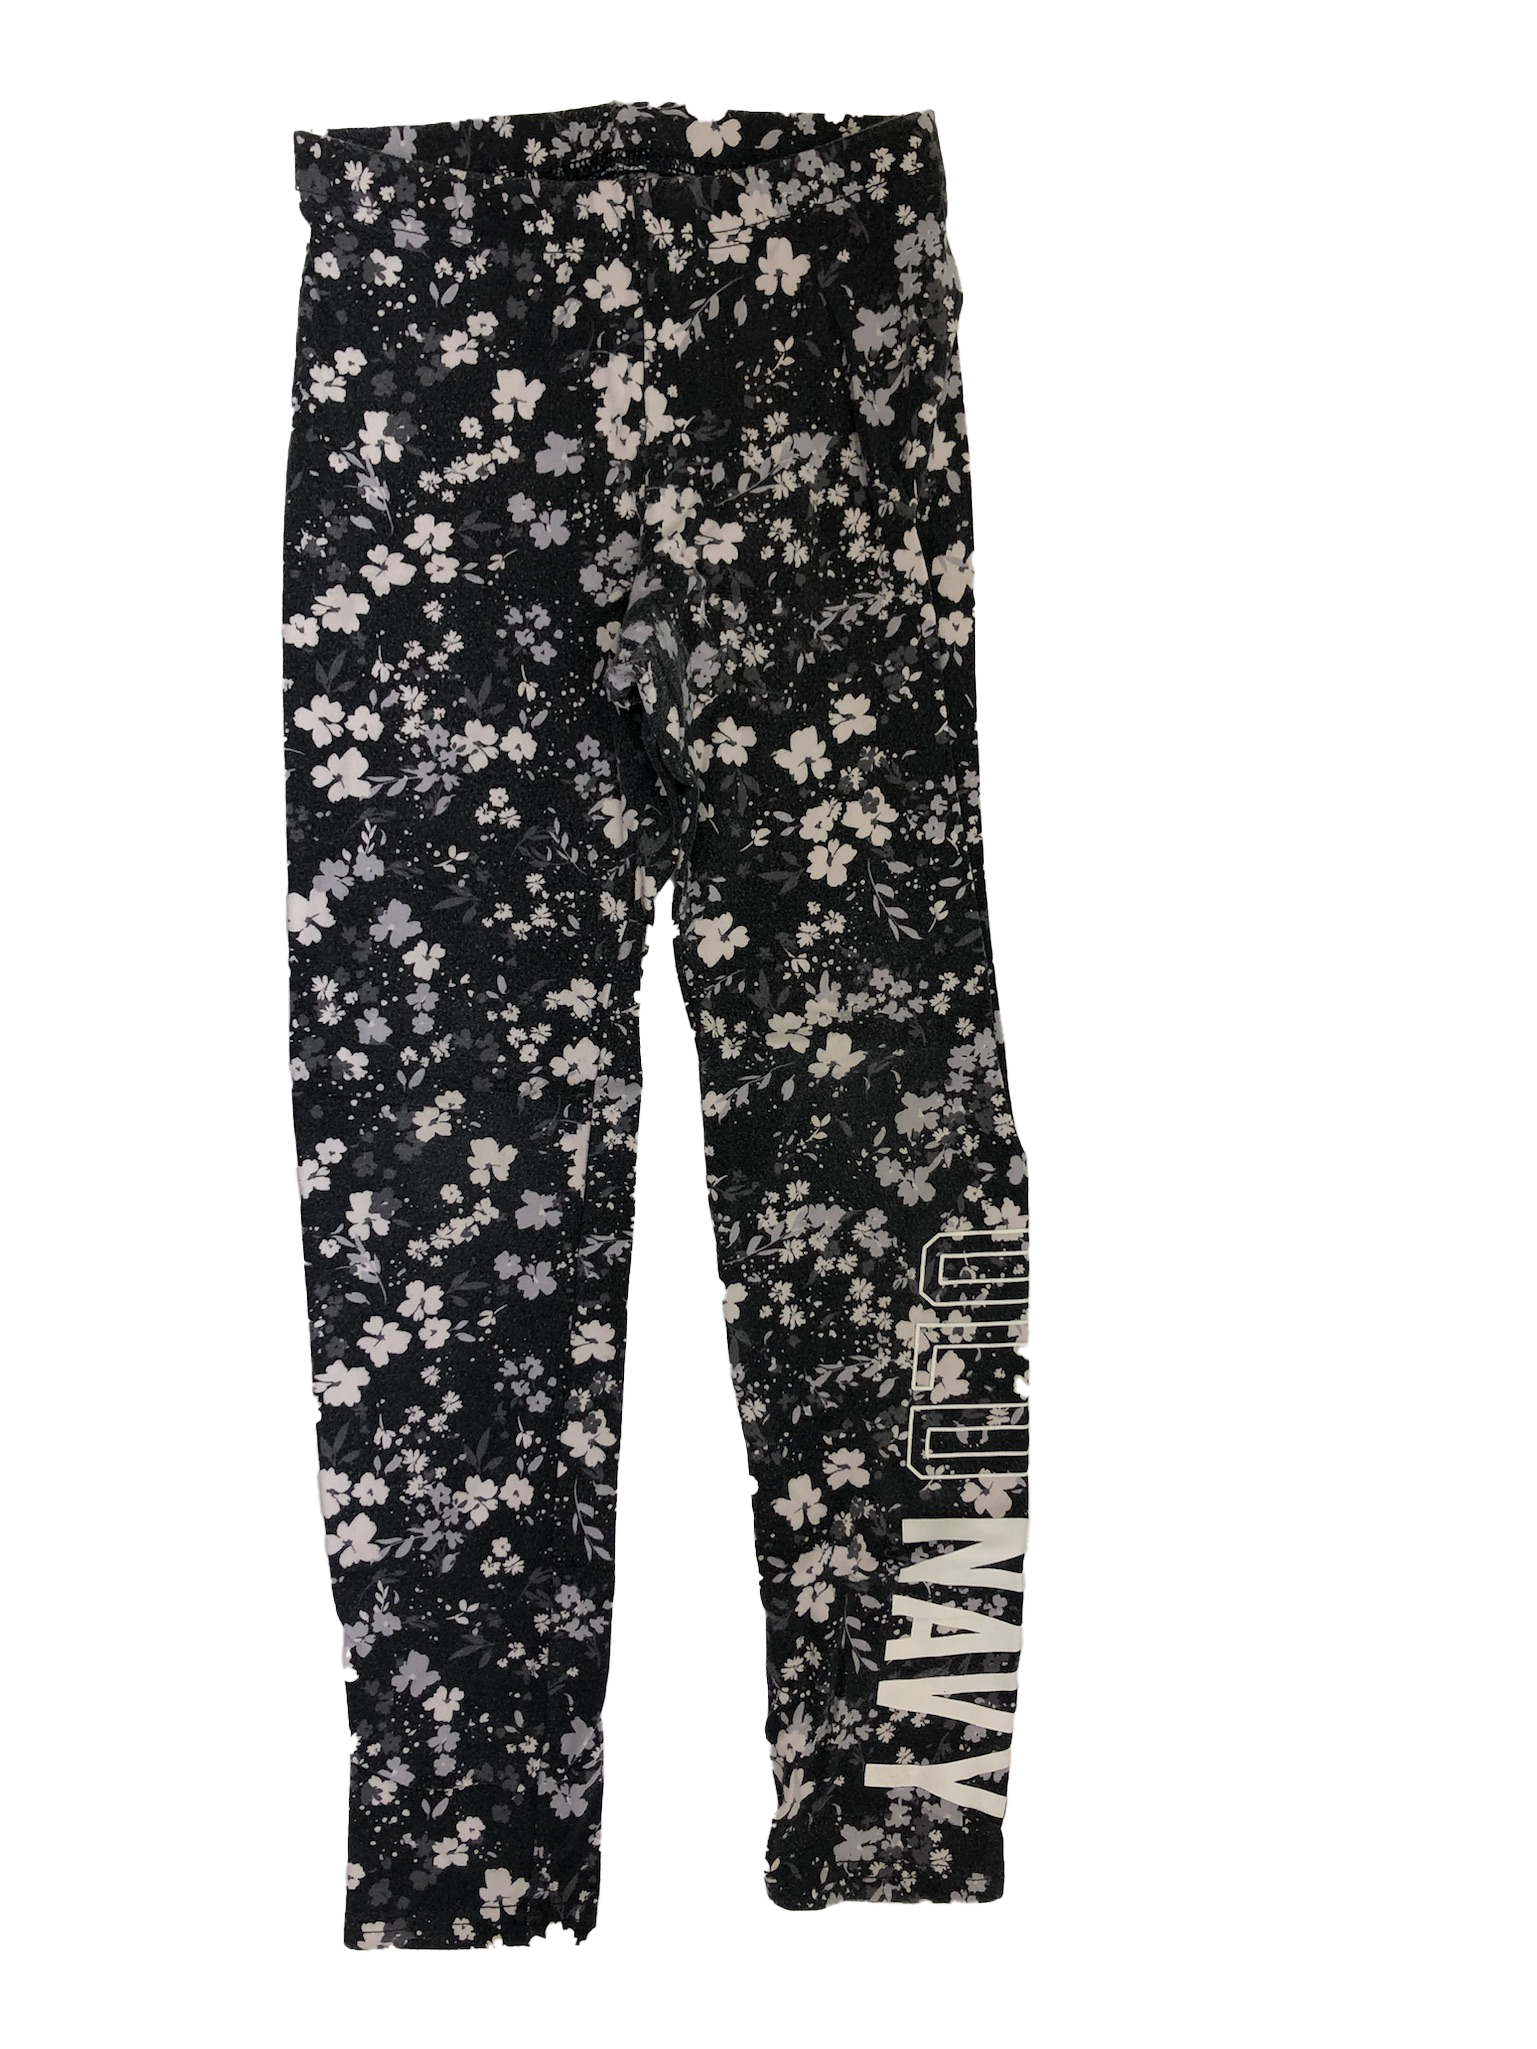 Old Navy Black Floral Leggings with Old Navy on Leg 8 – The Sweet Pea Shop